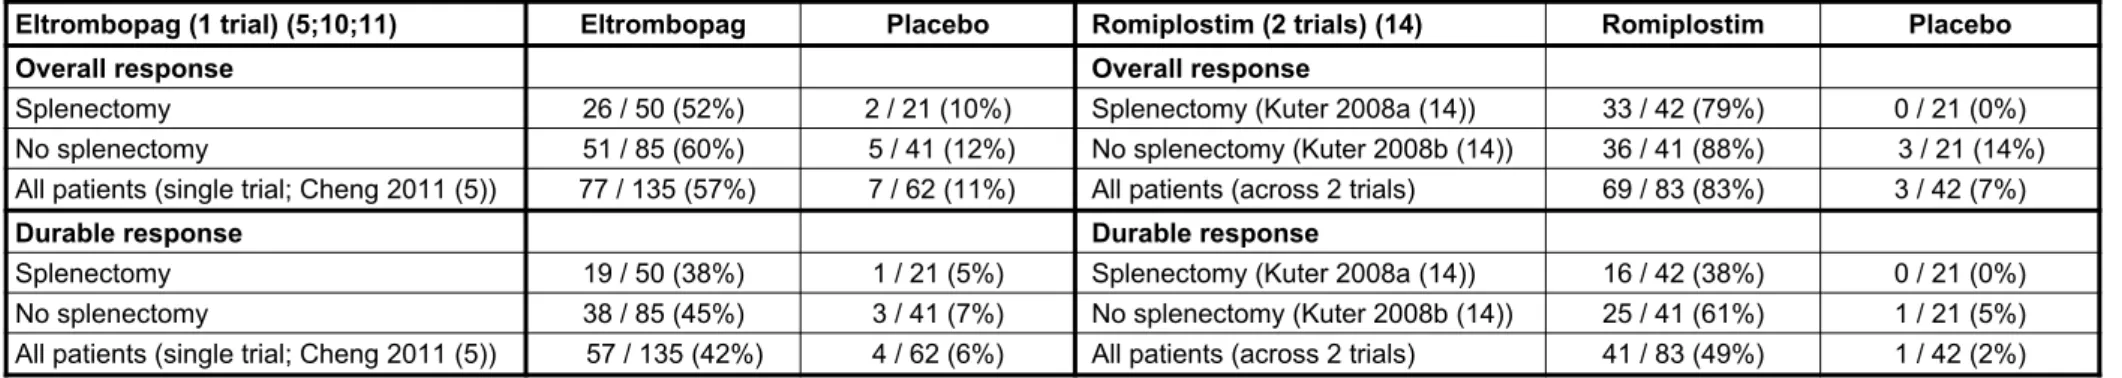 Table 3: Overall and durable platelet response rates for romiplostim and eltrombopag